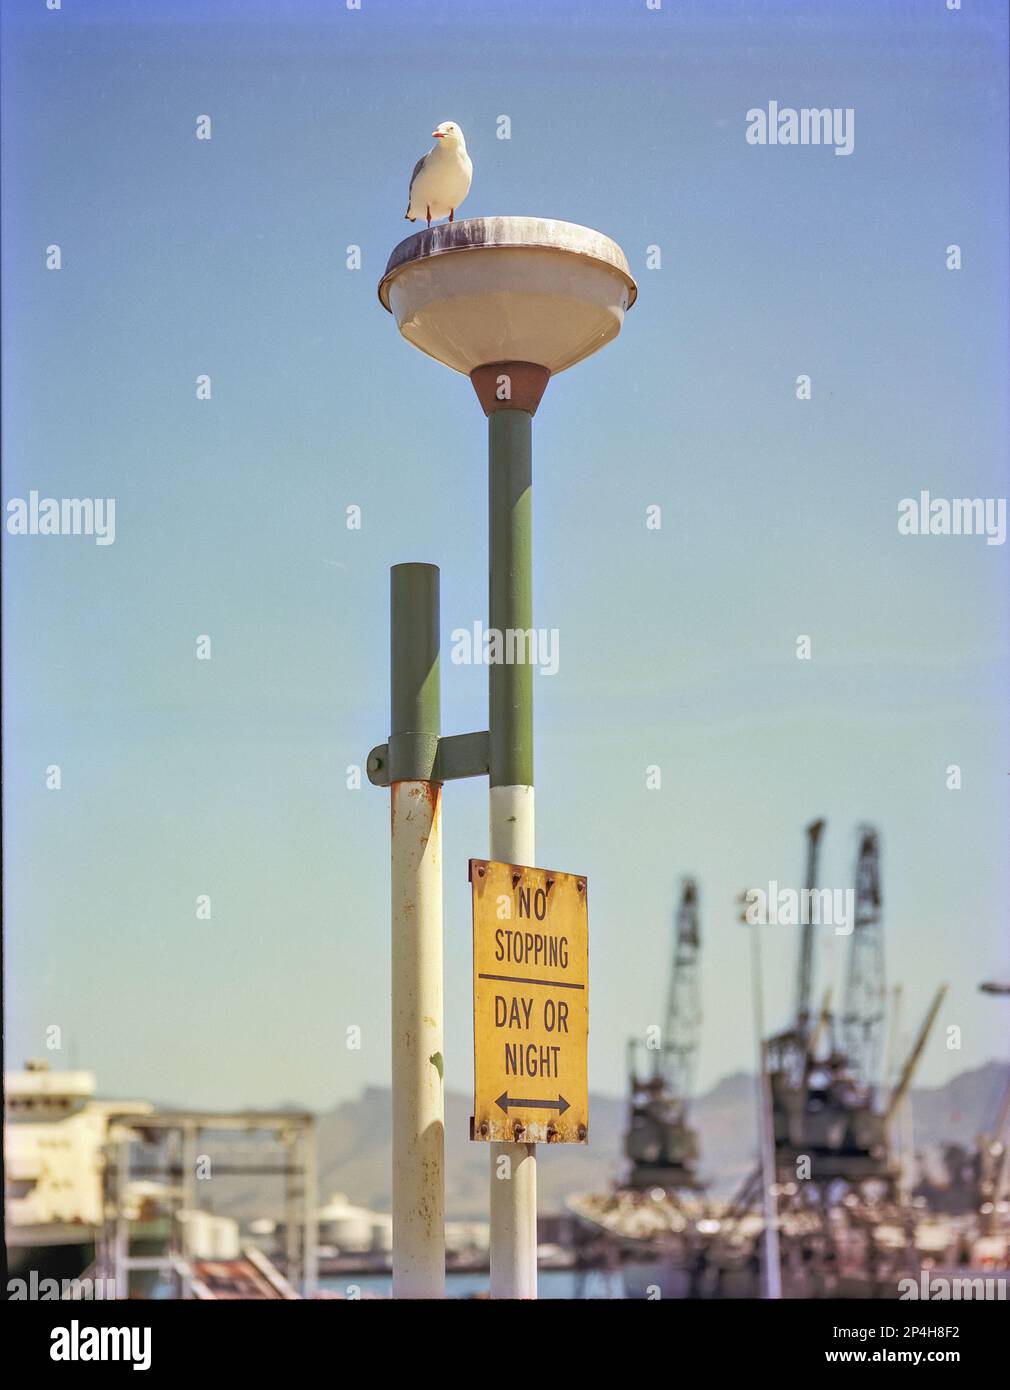 A 1981 historic image of a seagull (Silver Gull) sitting on top of a street light and a No Stopping sign at the port of Lyttelton near Christchurch in the South Island of New Zealand Stock Photo